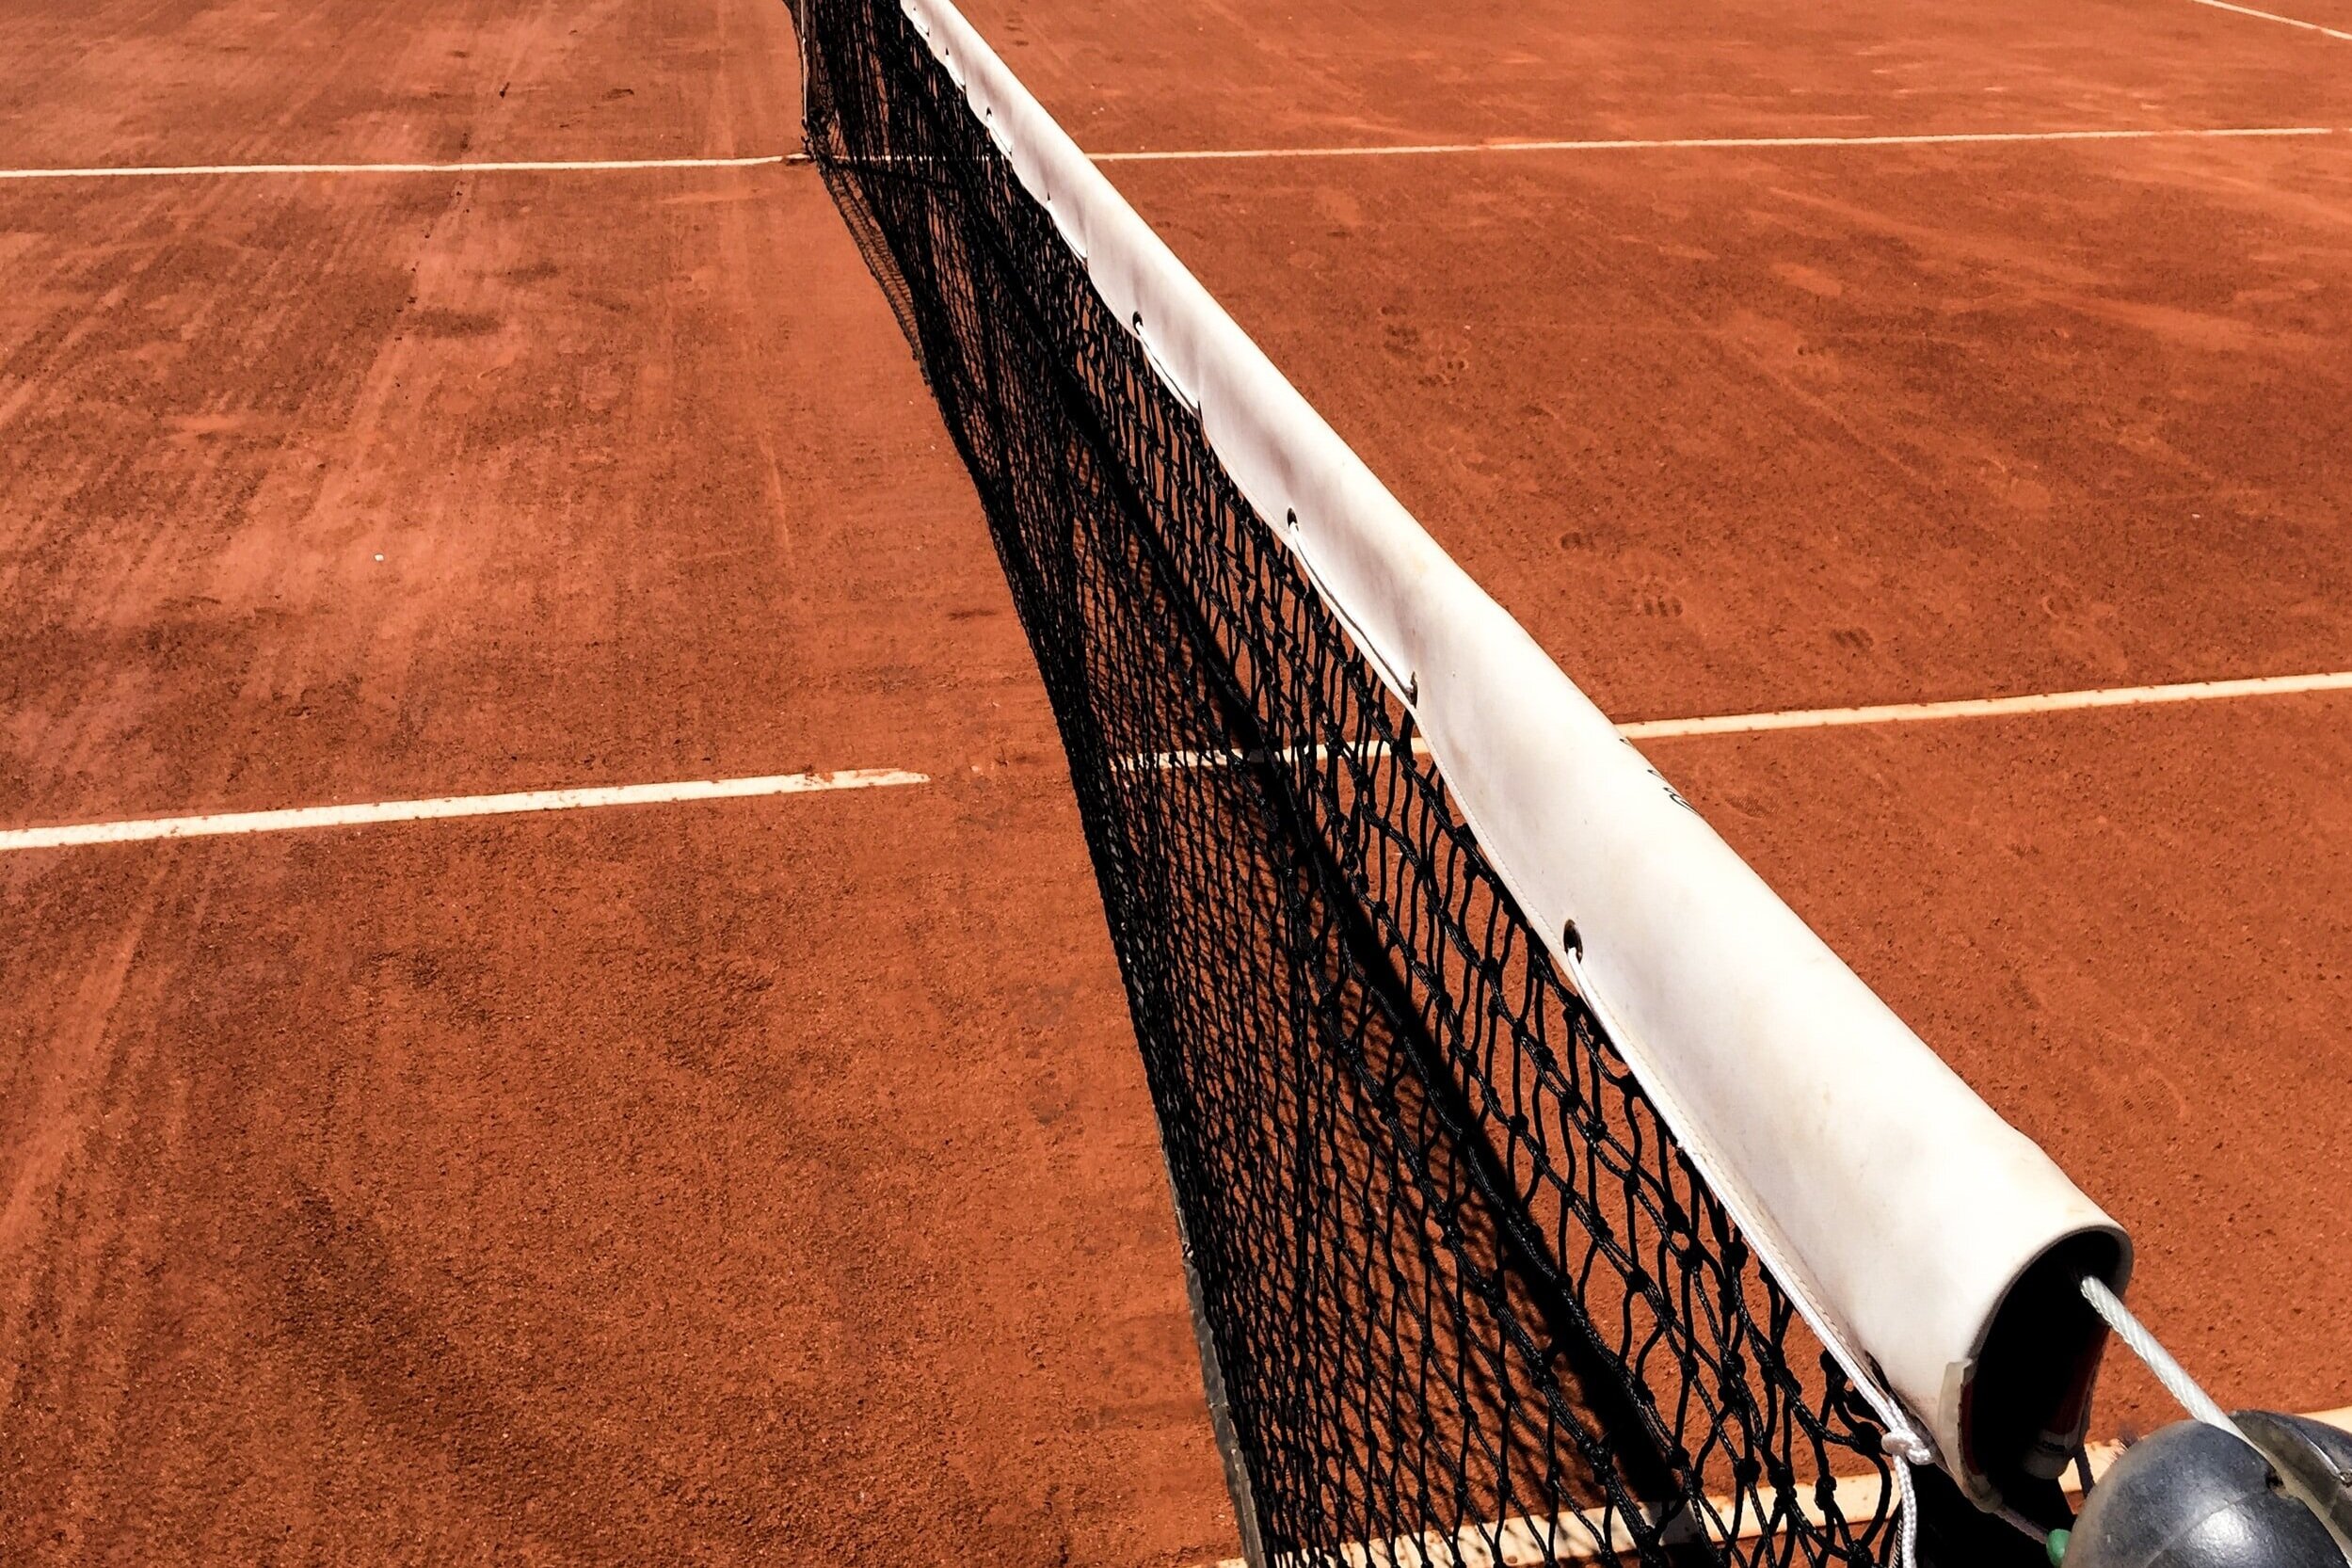 Tennis court in a luxury town on the Côte d'Azur